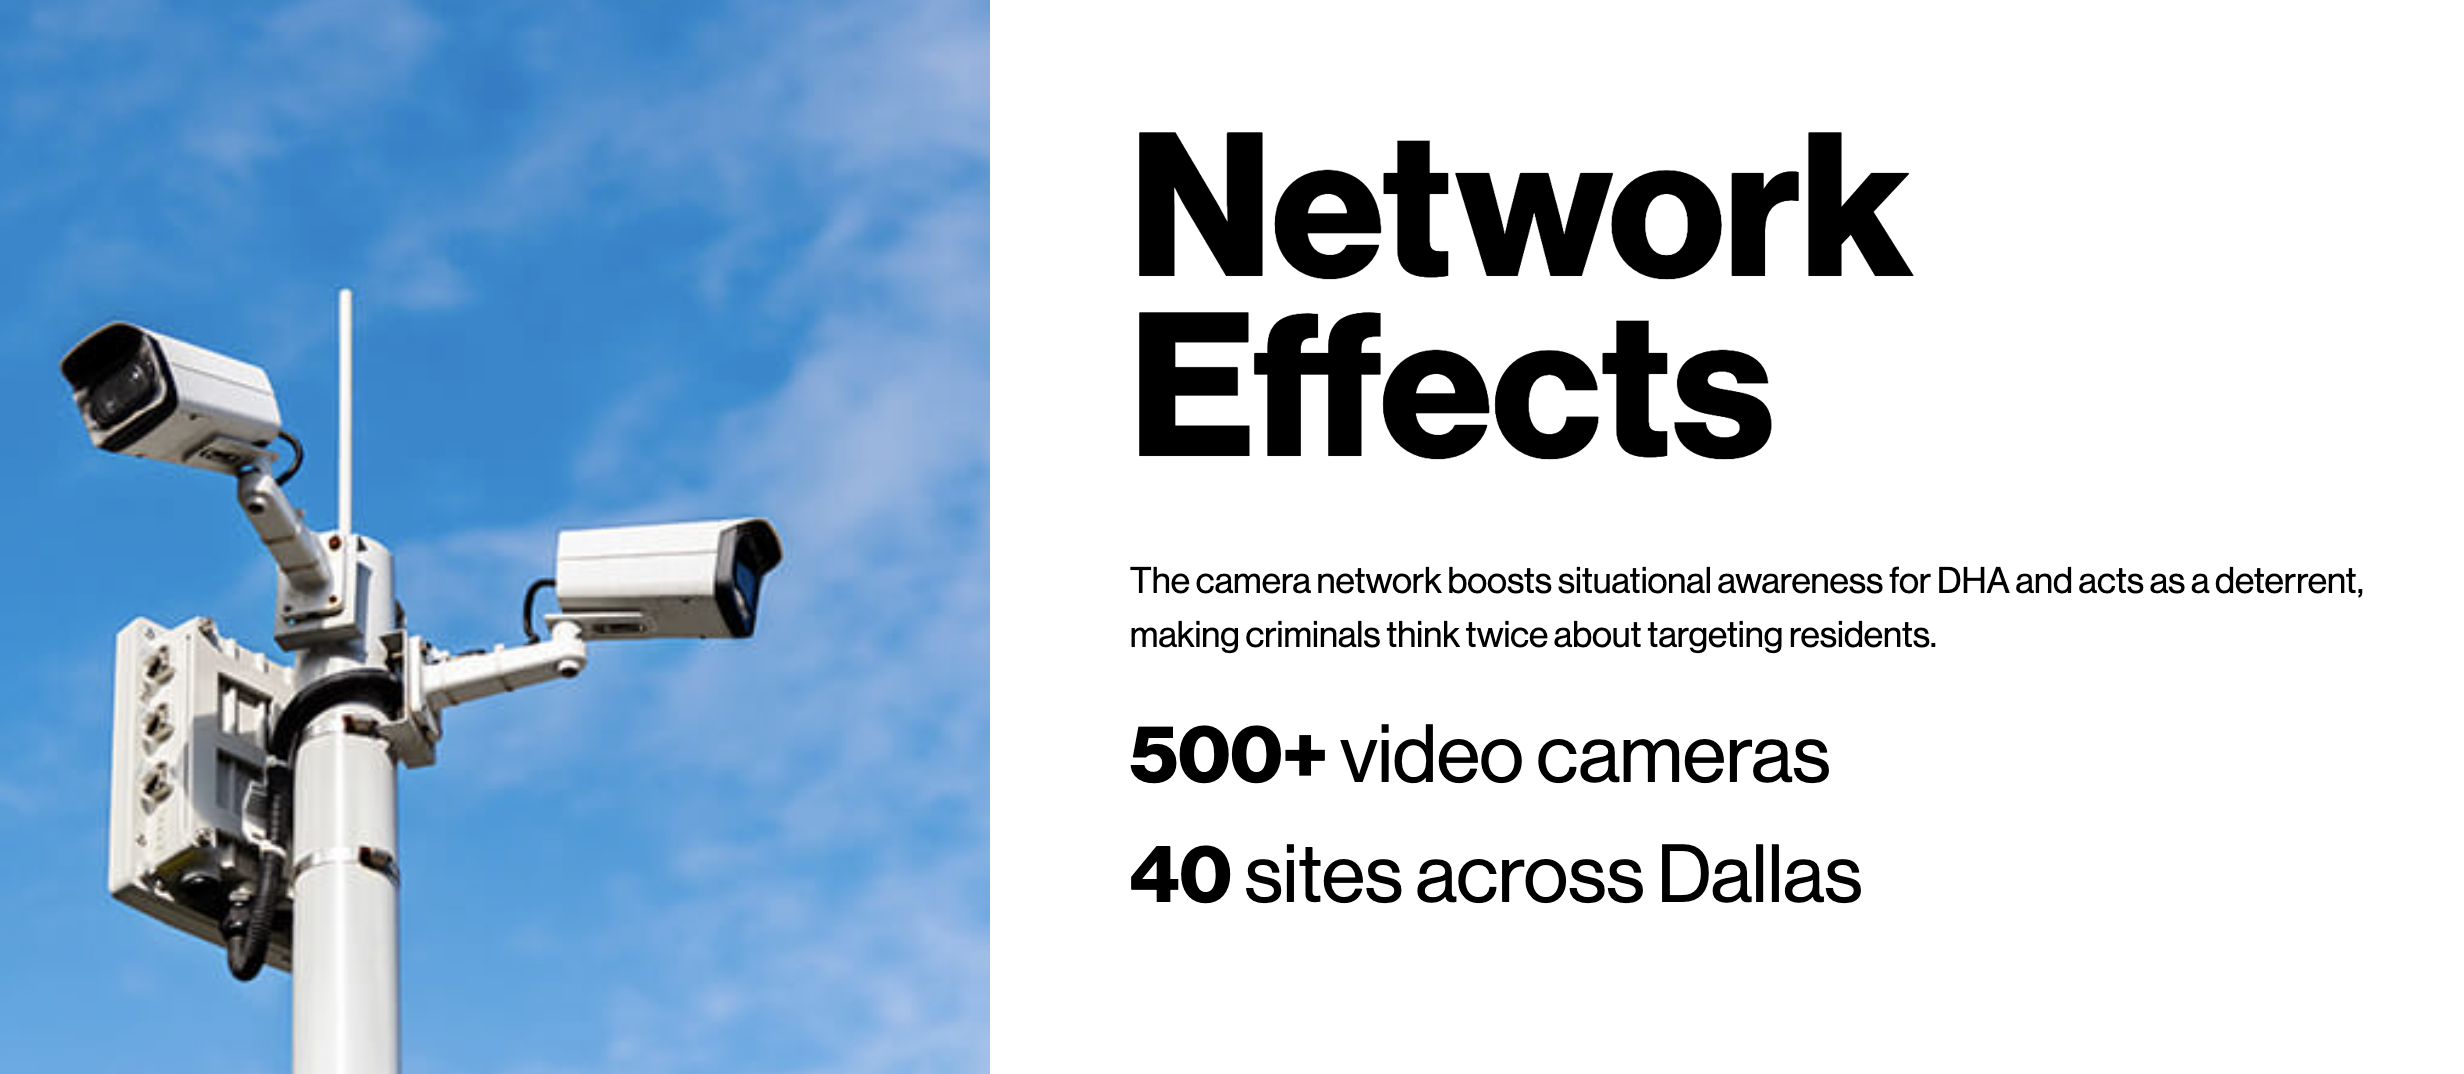 The camera network boosts situational awareness for DHA and acts as a deterrent, making criminals think twice about targeting residents. There are 500+ video cameras and 40 sites across Dallas.